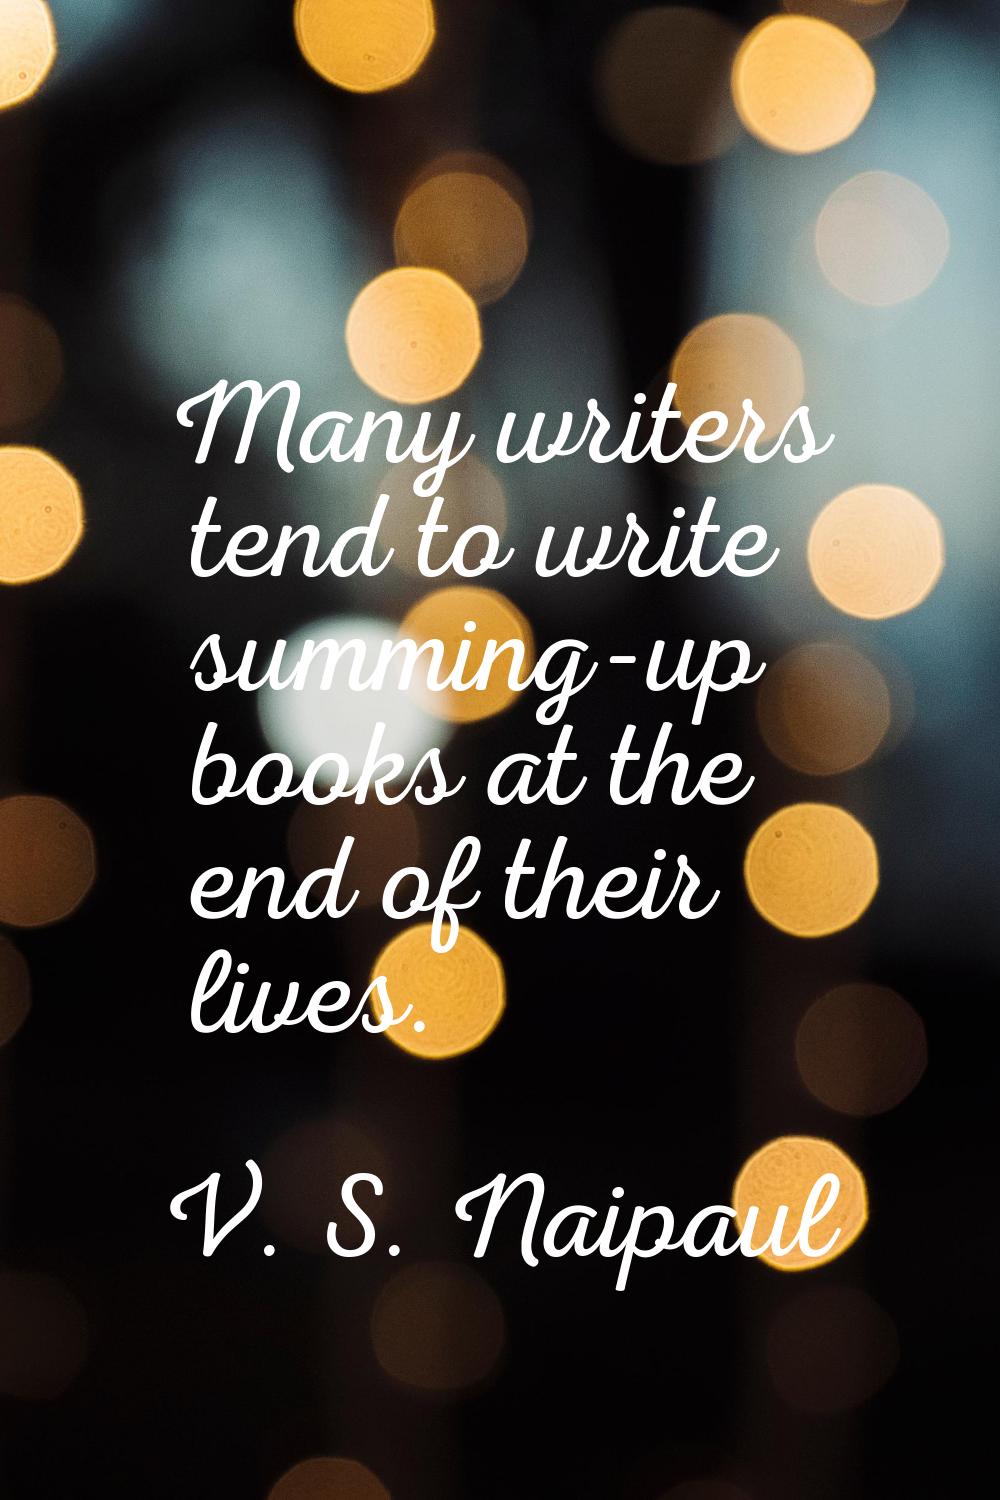 Many writers tend to write summing-up books at the end of their lives.